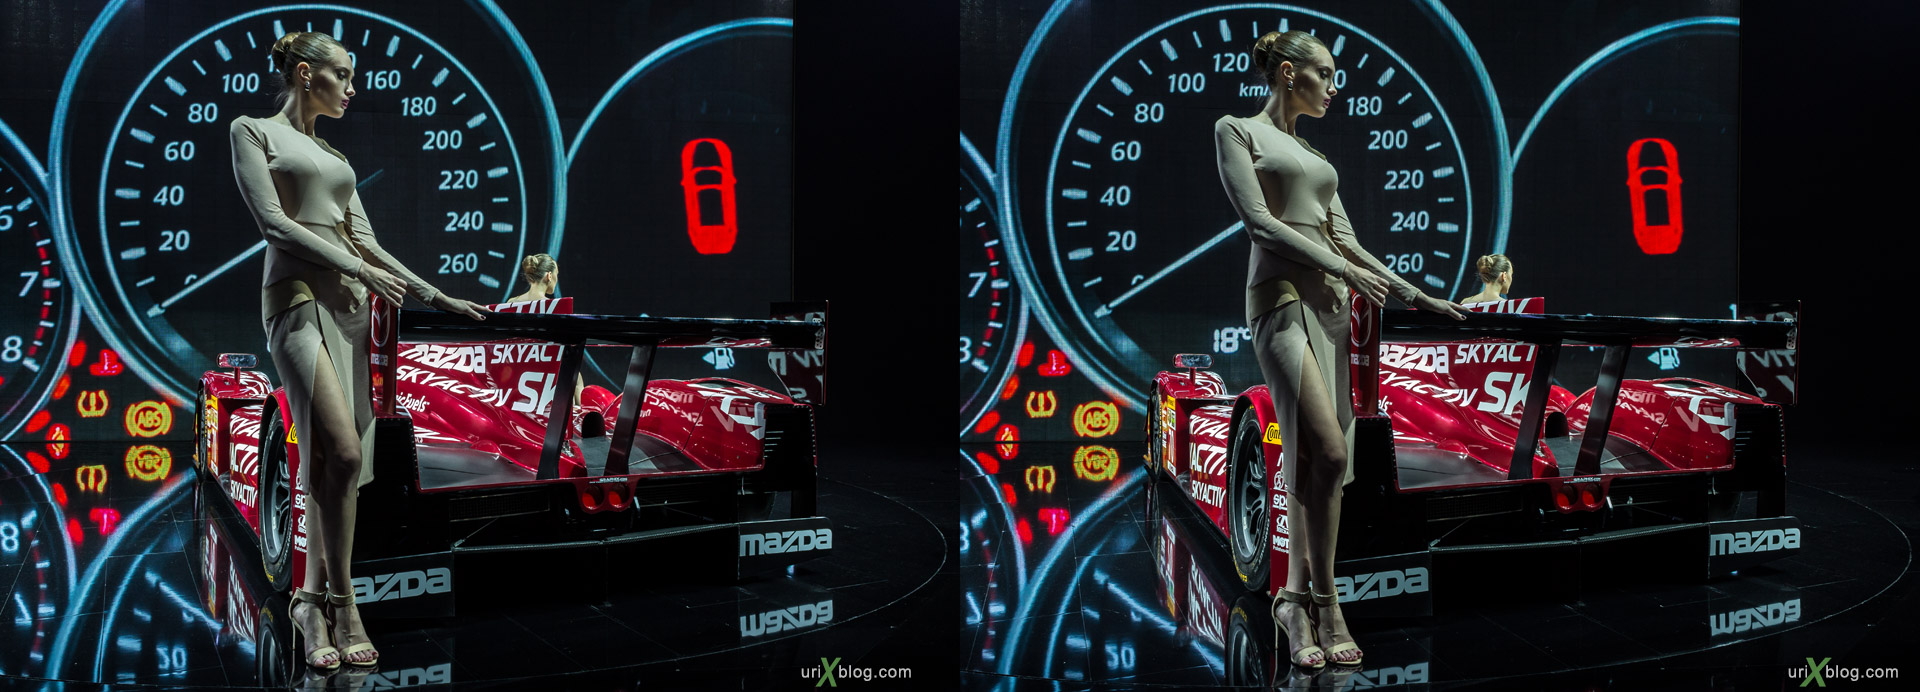 2014, Mazda, Moscow International Automobile Salon, MIAS, Crocus Expo, model, girl, Moscow, Russia, augest, 3D, stereo pair, cross-eyed, crossview, cross view stereo pair, stereoscopic